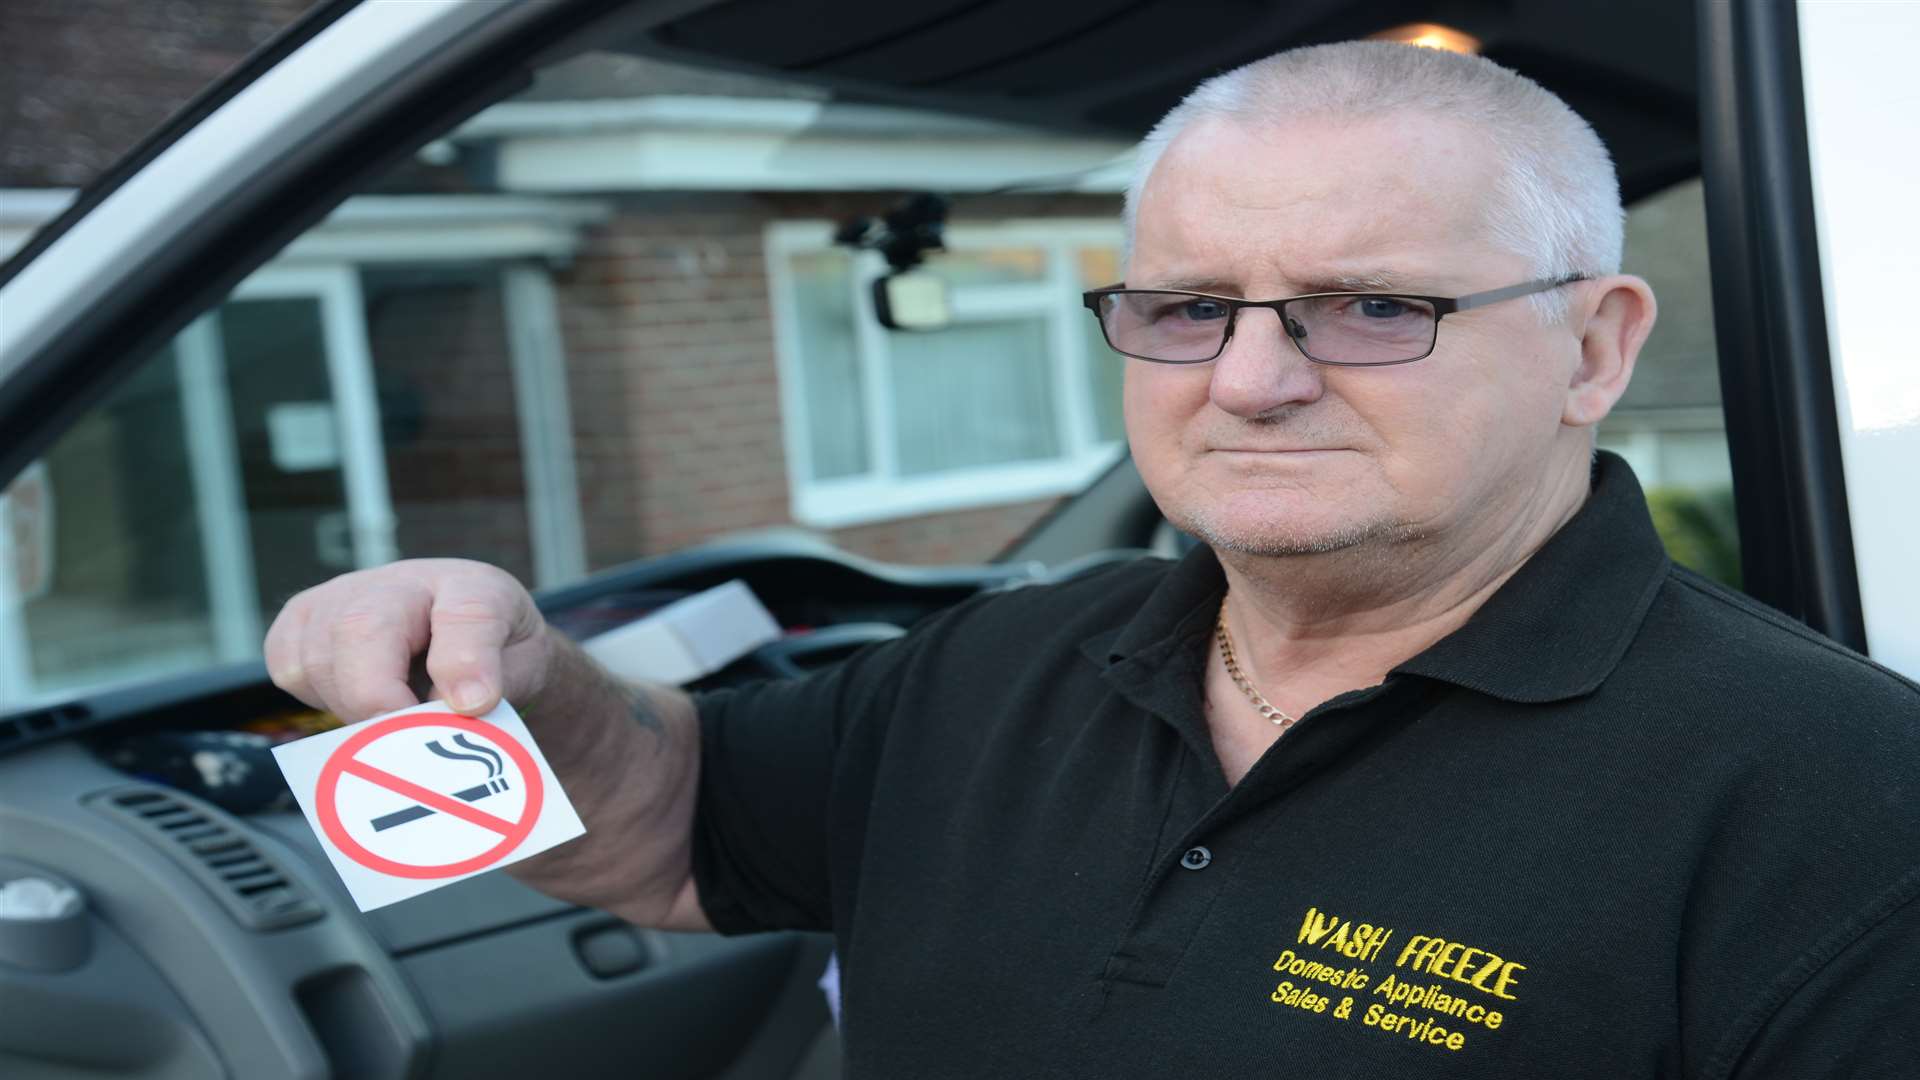 Trevor Emery who was fined £200 for not having a 'no smoking' sign in his work van